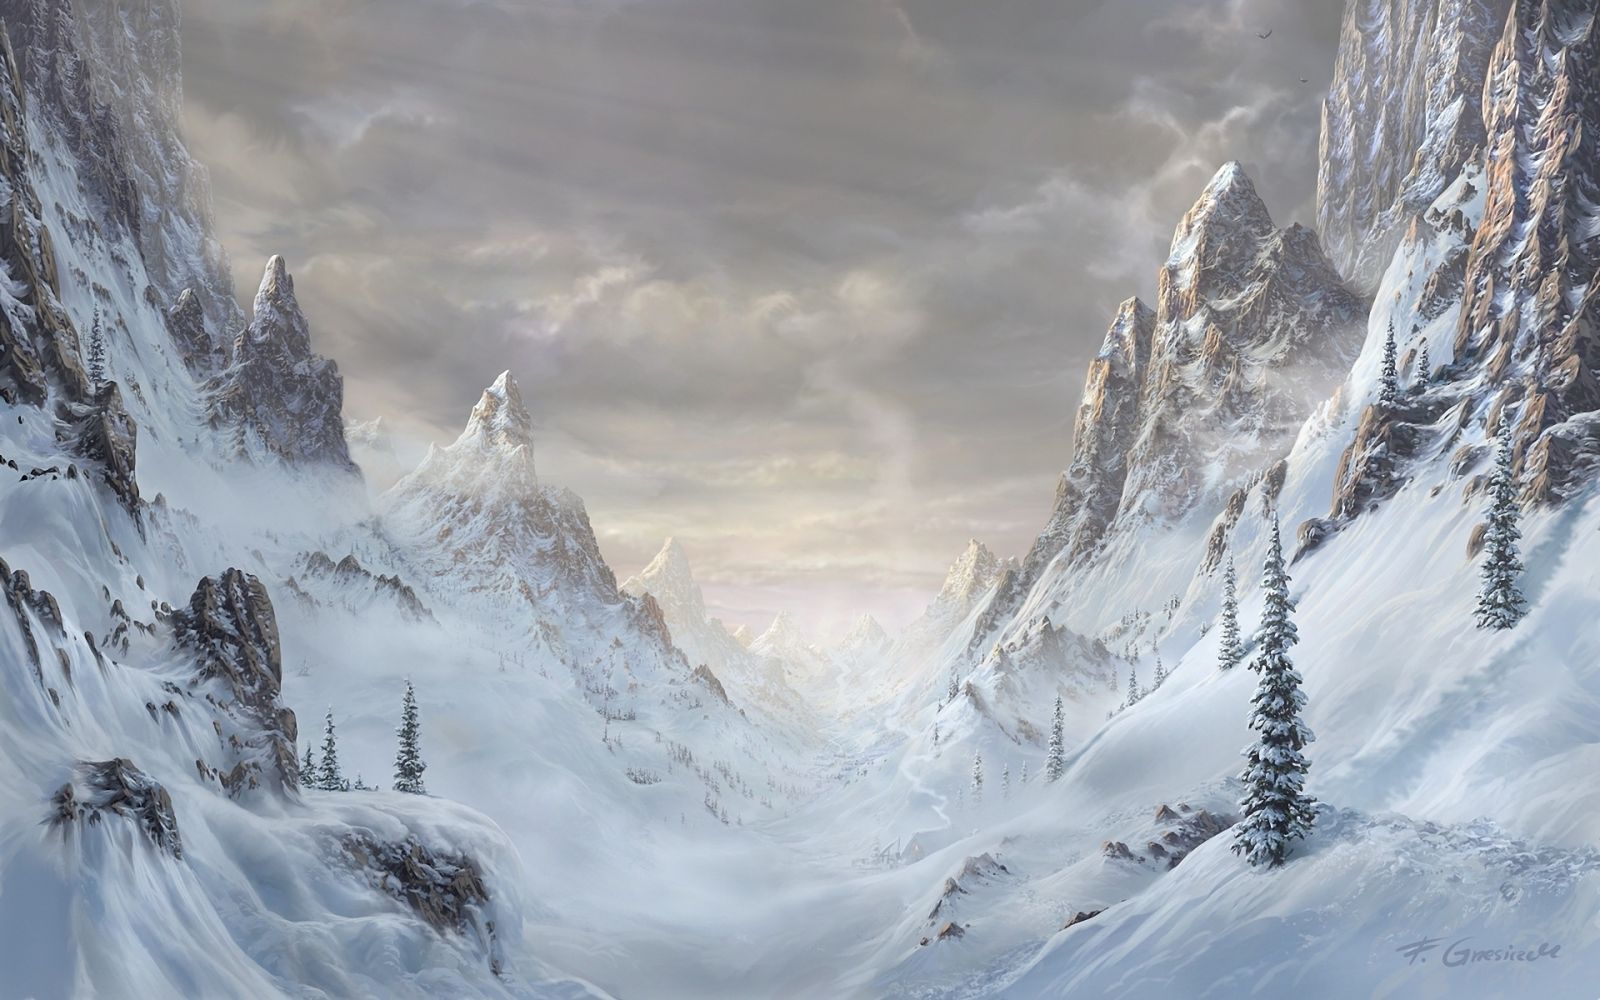 art paintings mountains forest art rocks nature trees snow spruce winter landscape wallpaper. Winter landscape, Fantasy landscape, Forest art